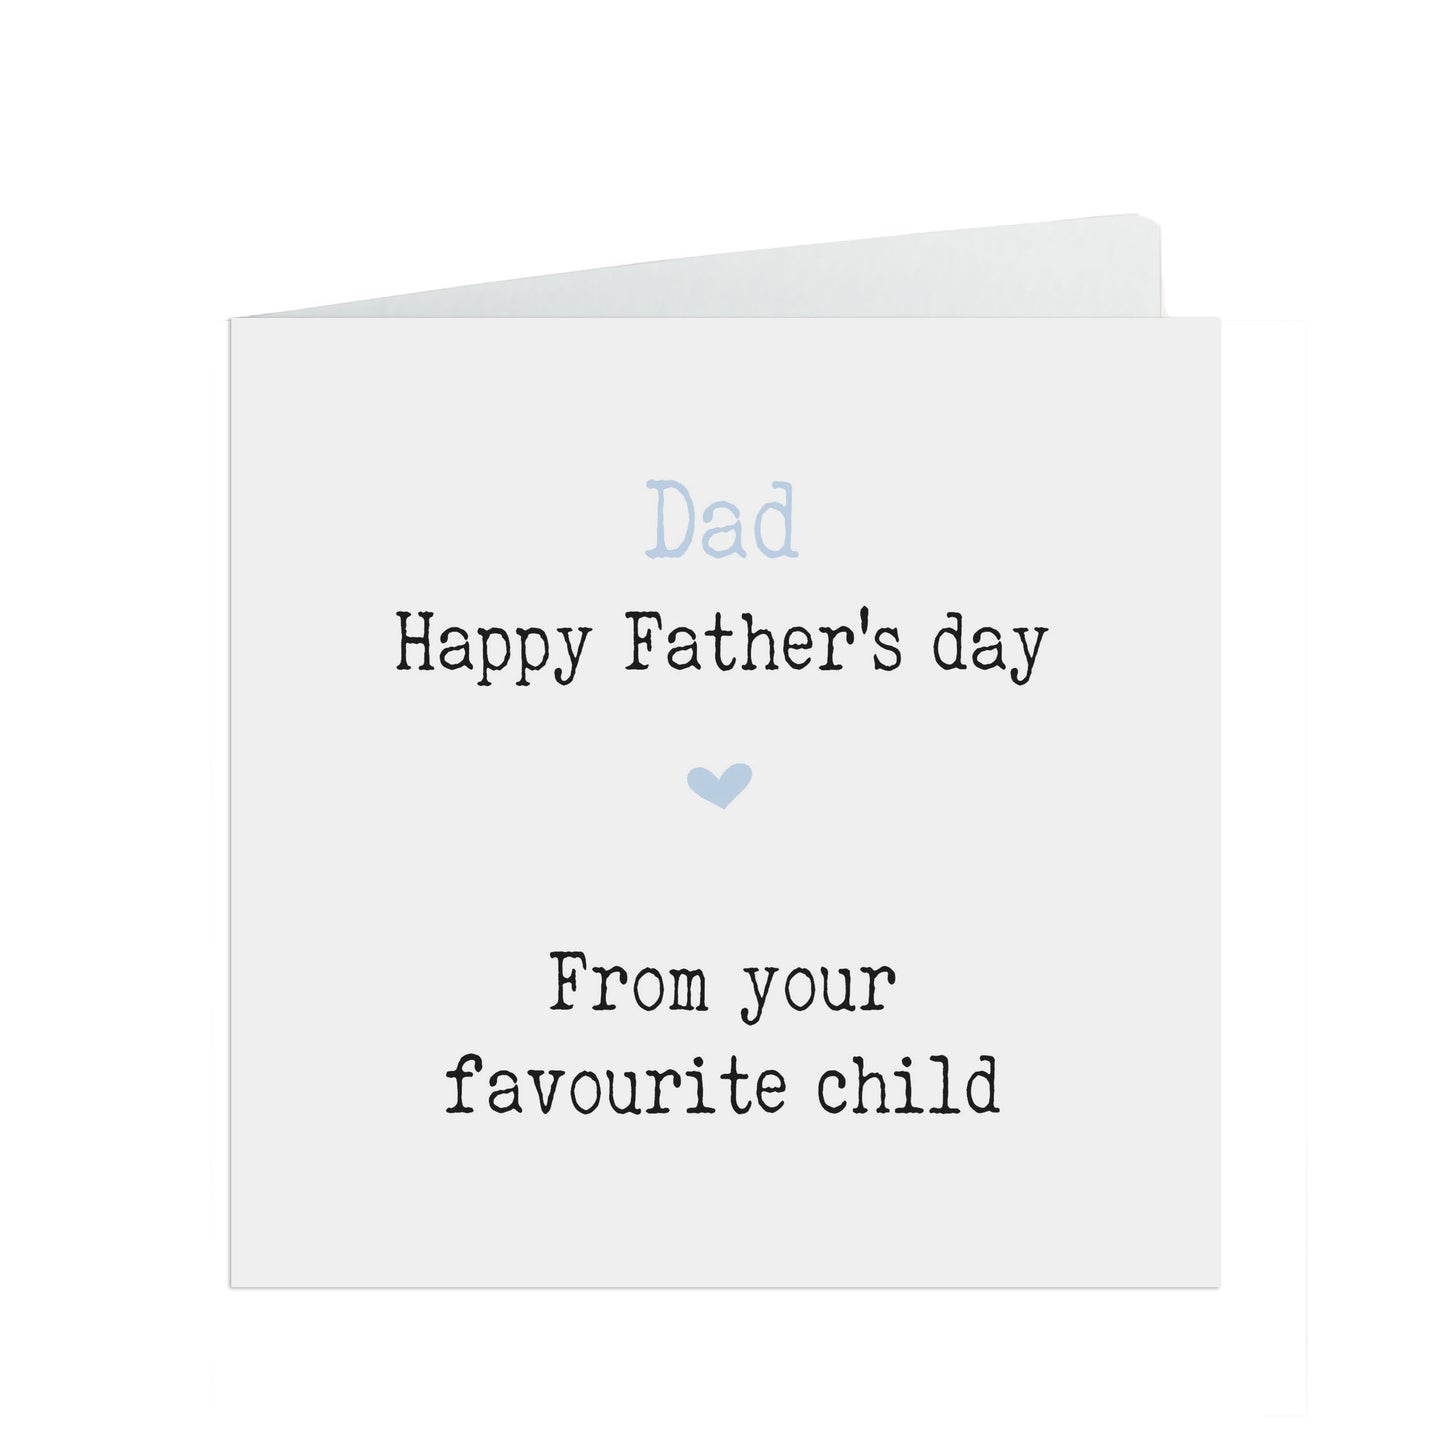  Happy Father's Day From Your Favourite Child, Funny Fathers Day Card by PMPRINTED 